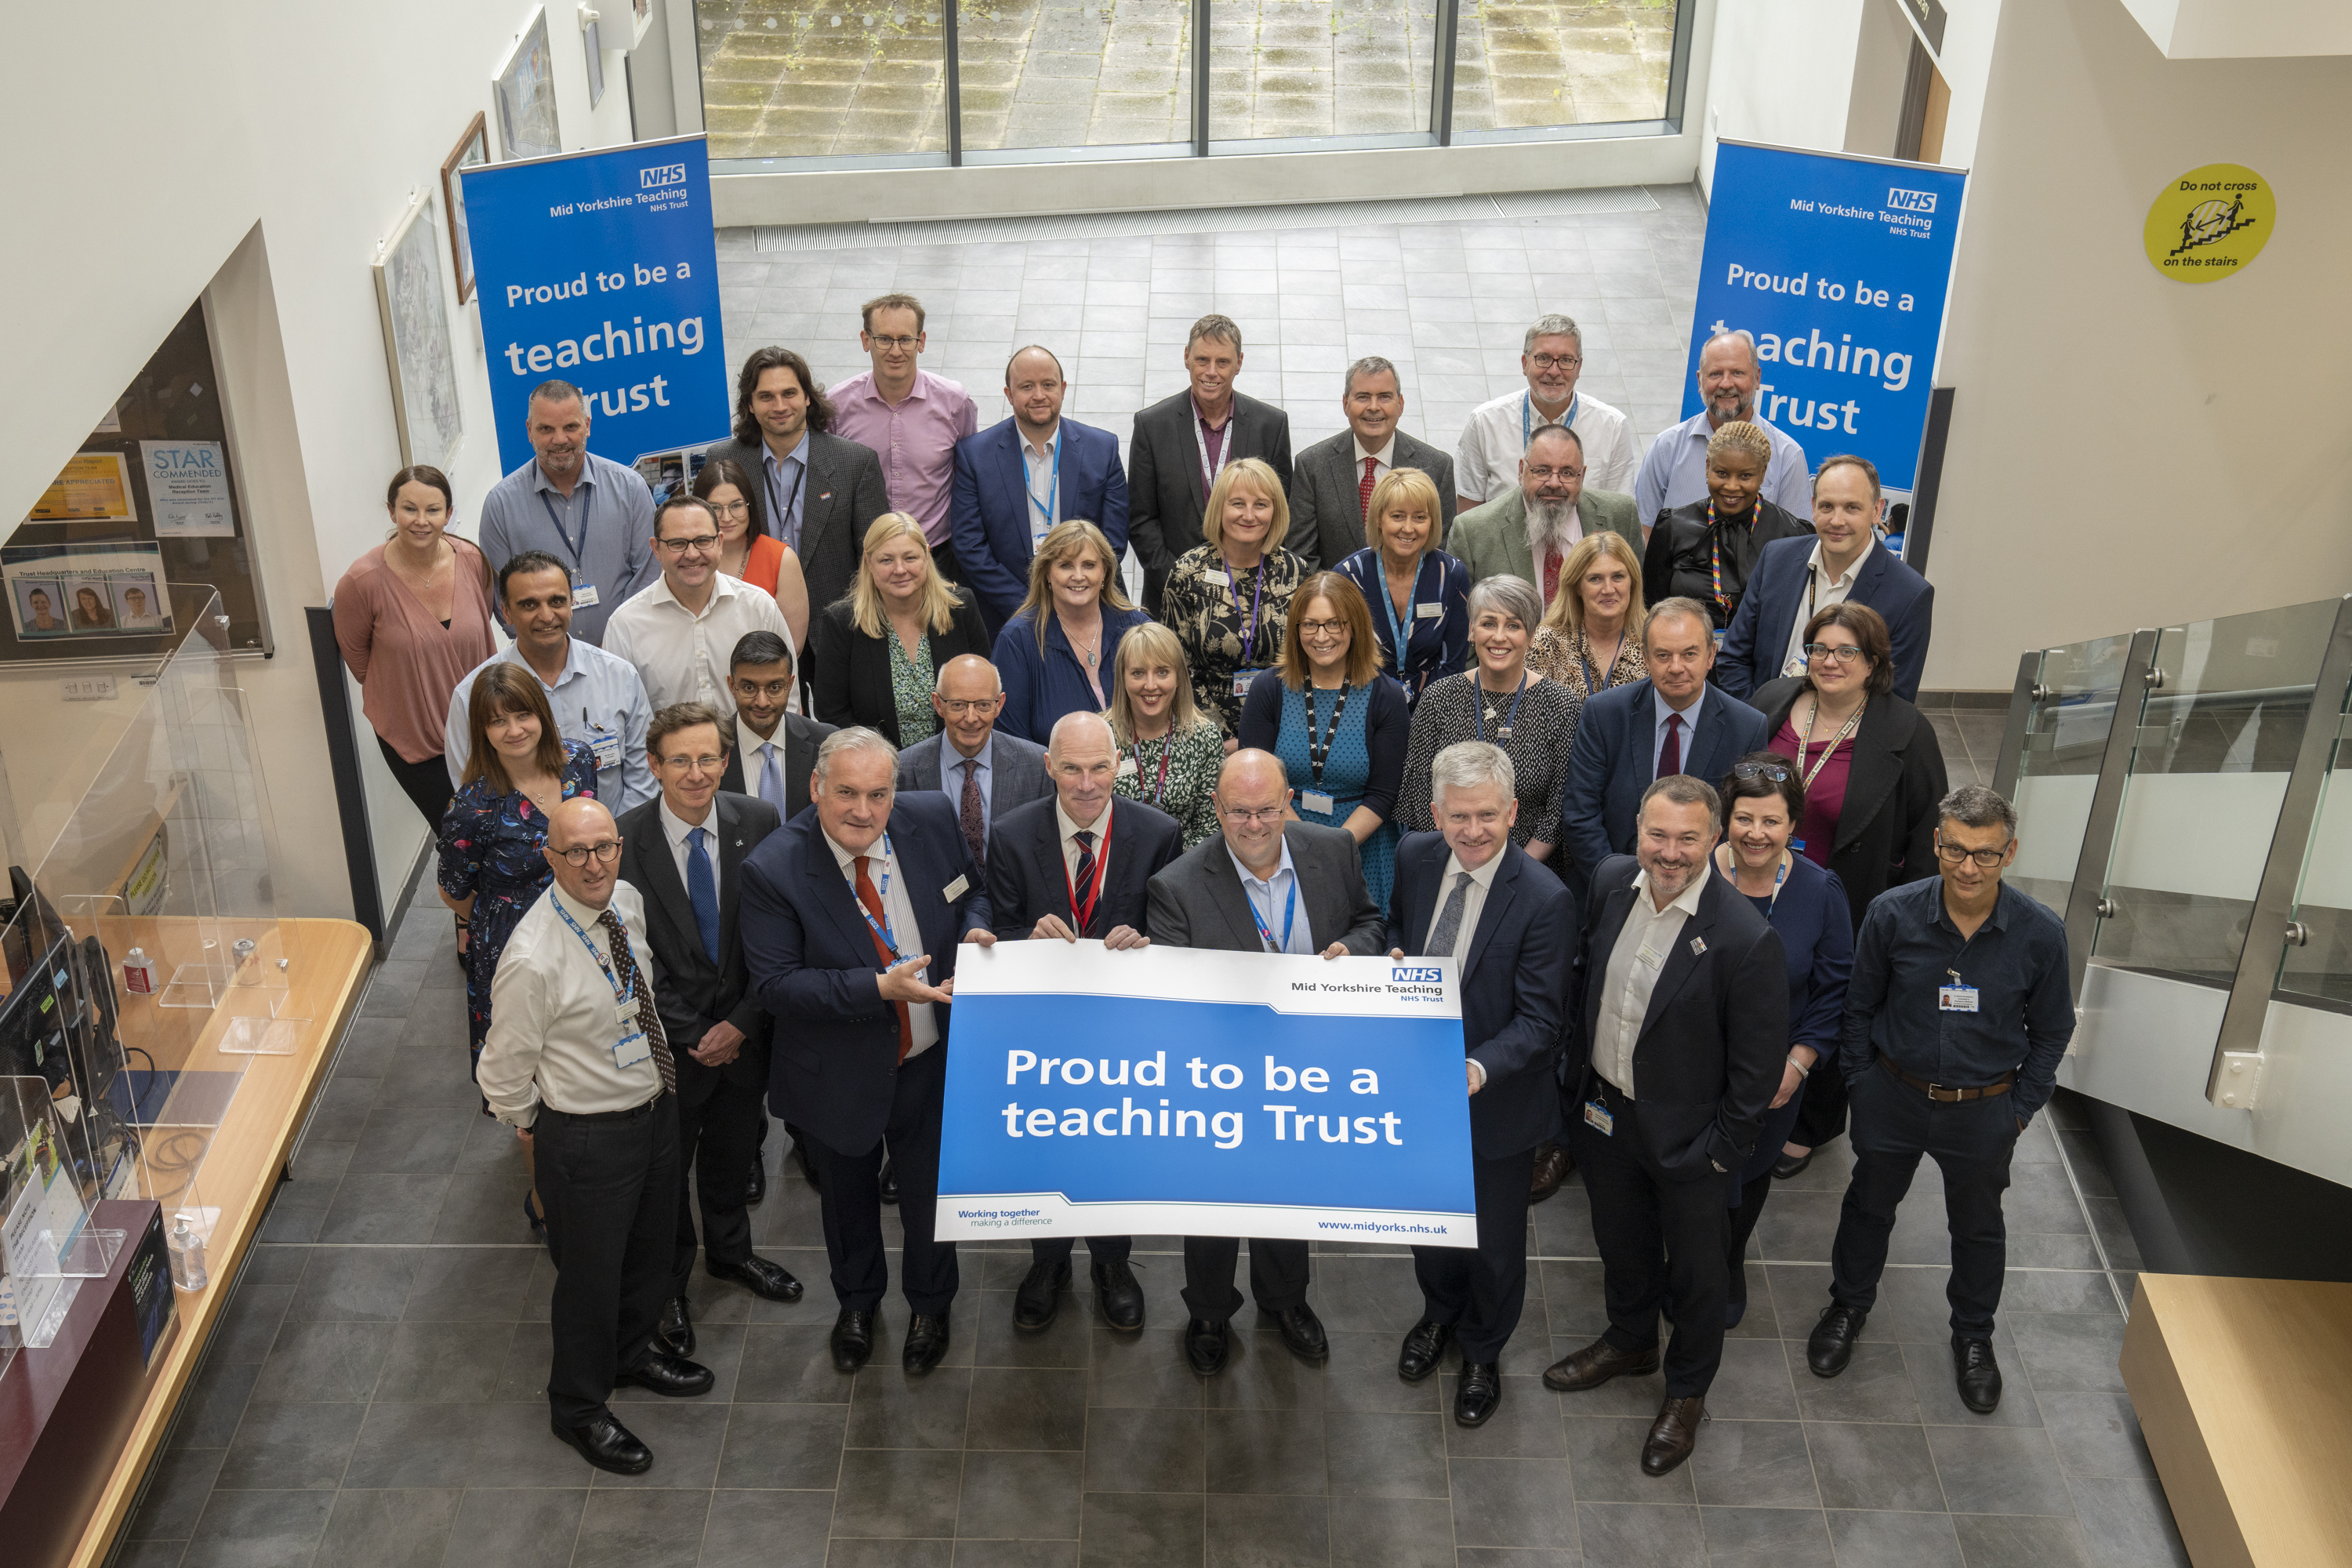 Mid Yorkshire Trust secures ambition of teaching status, a boost to recruitment and innovation opportunities